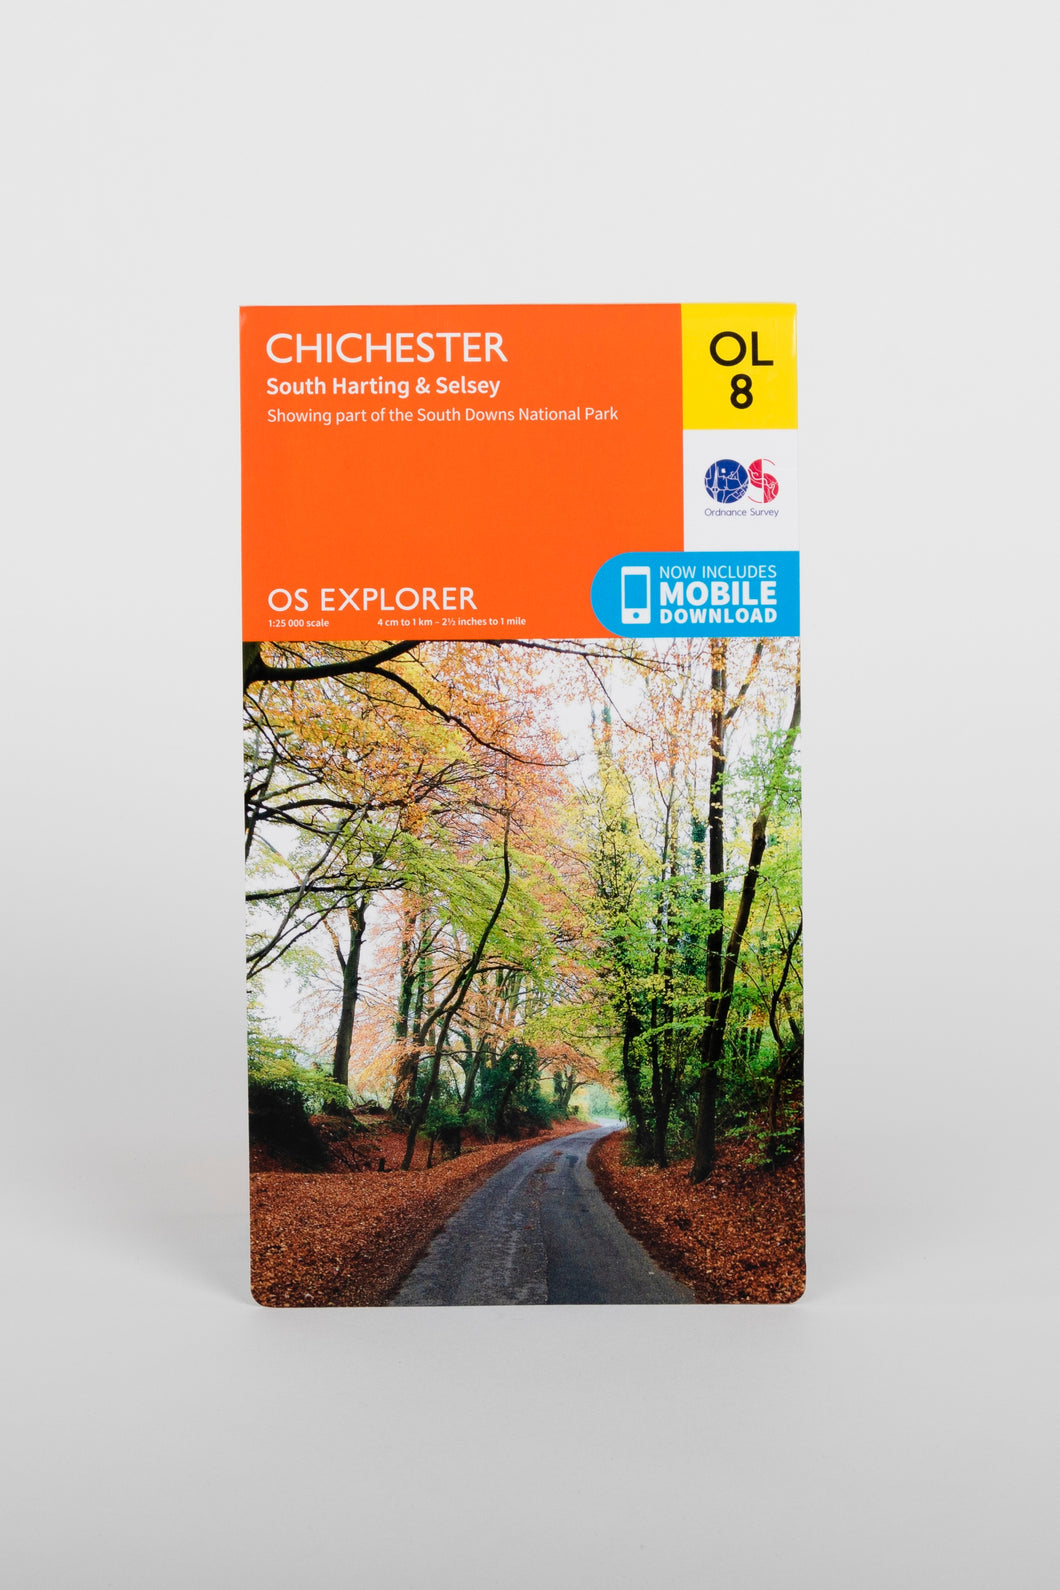 OS Explorer Map OL8 Chichester South Harting and Selsey